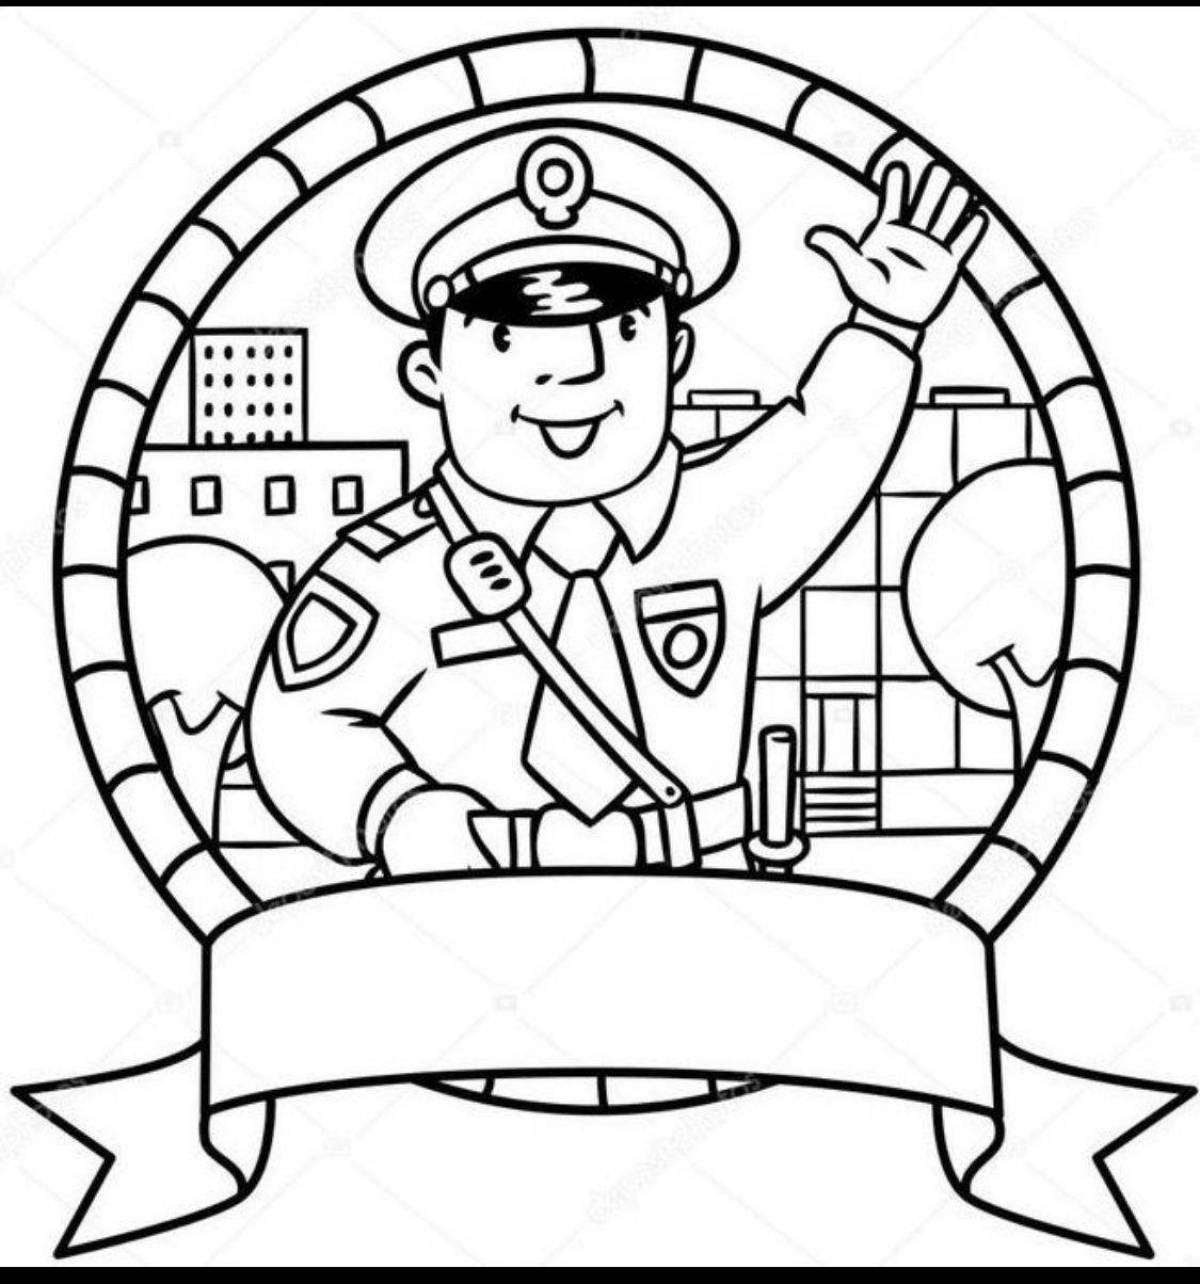 Wonderful police coloring book for kids